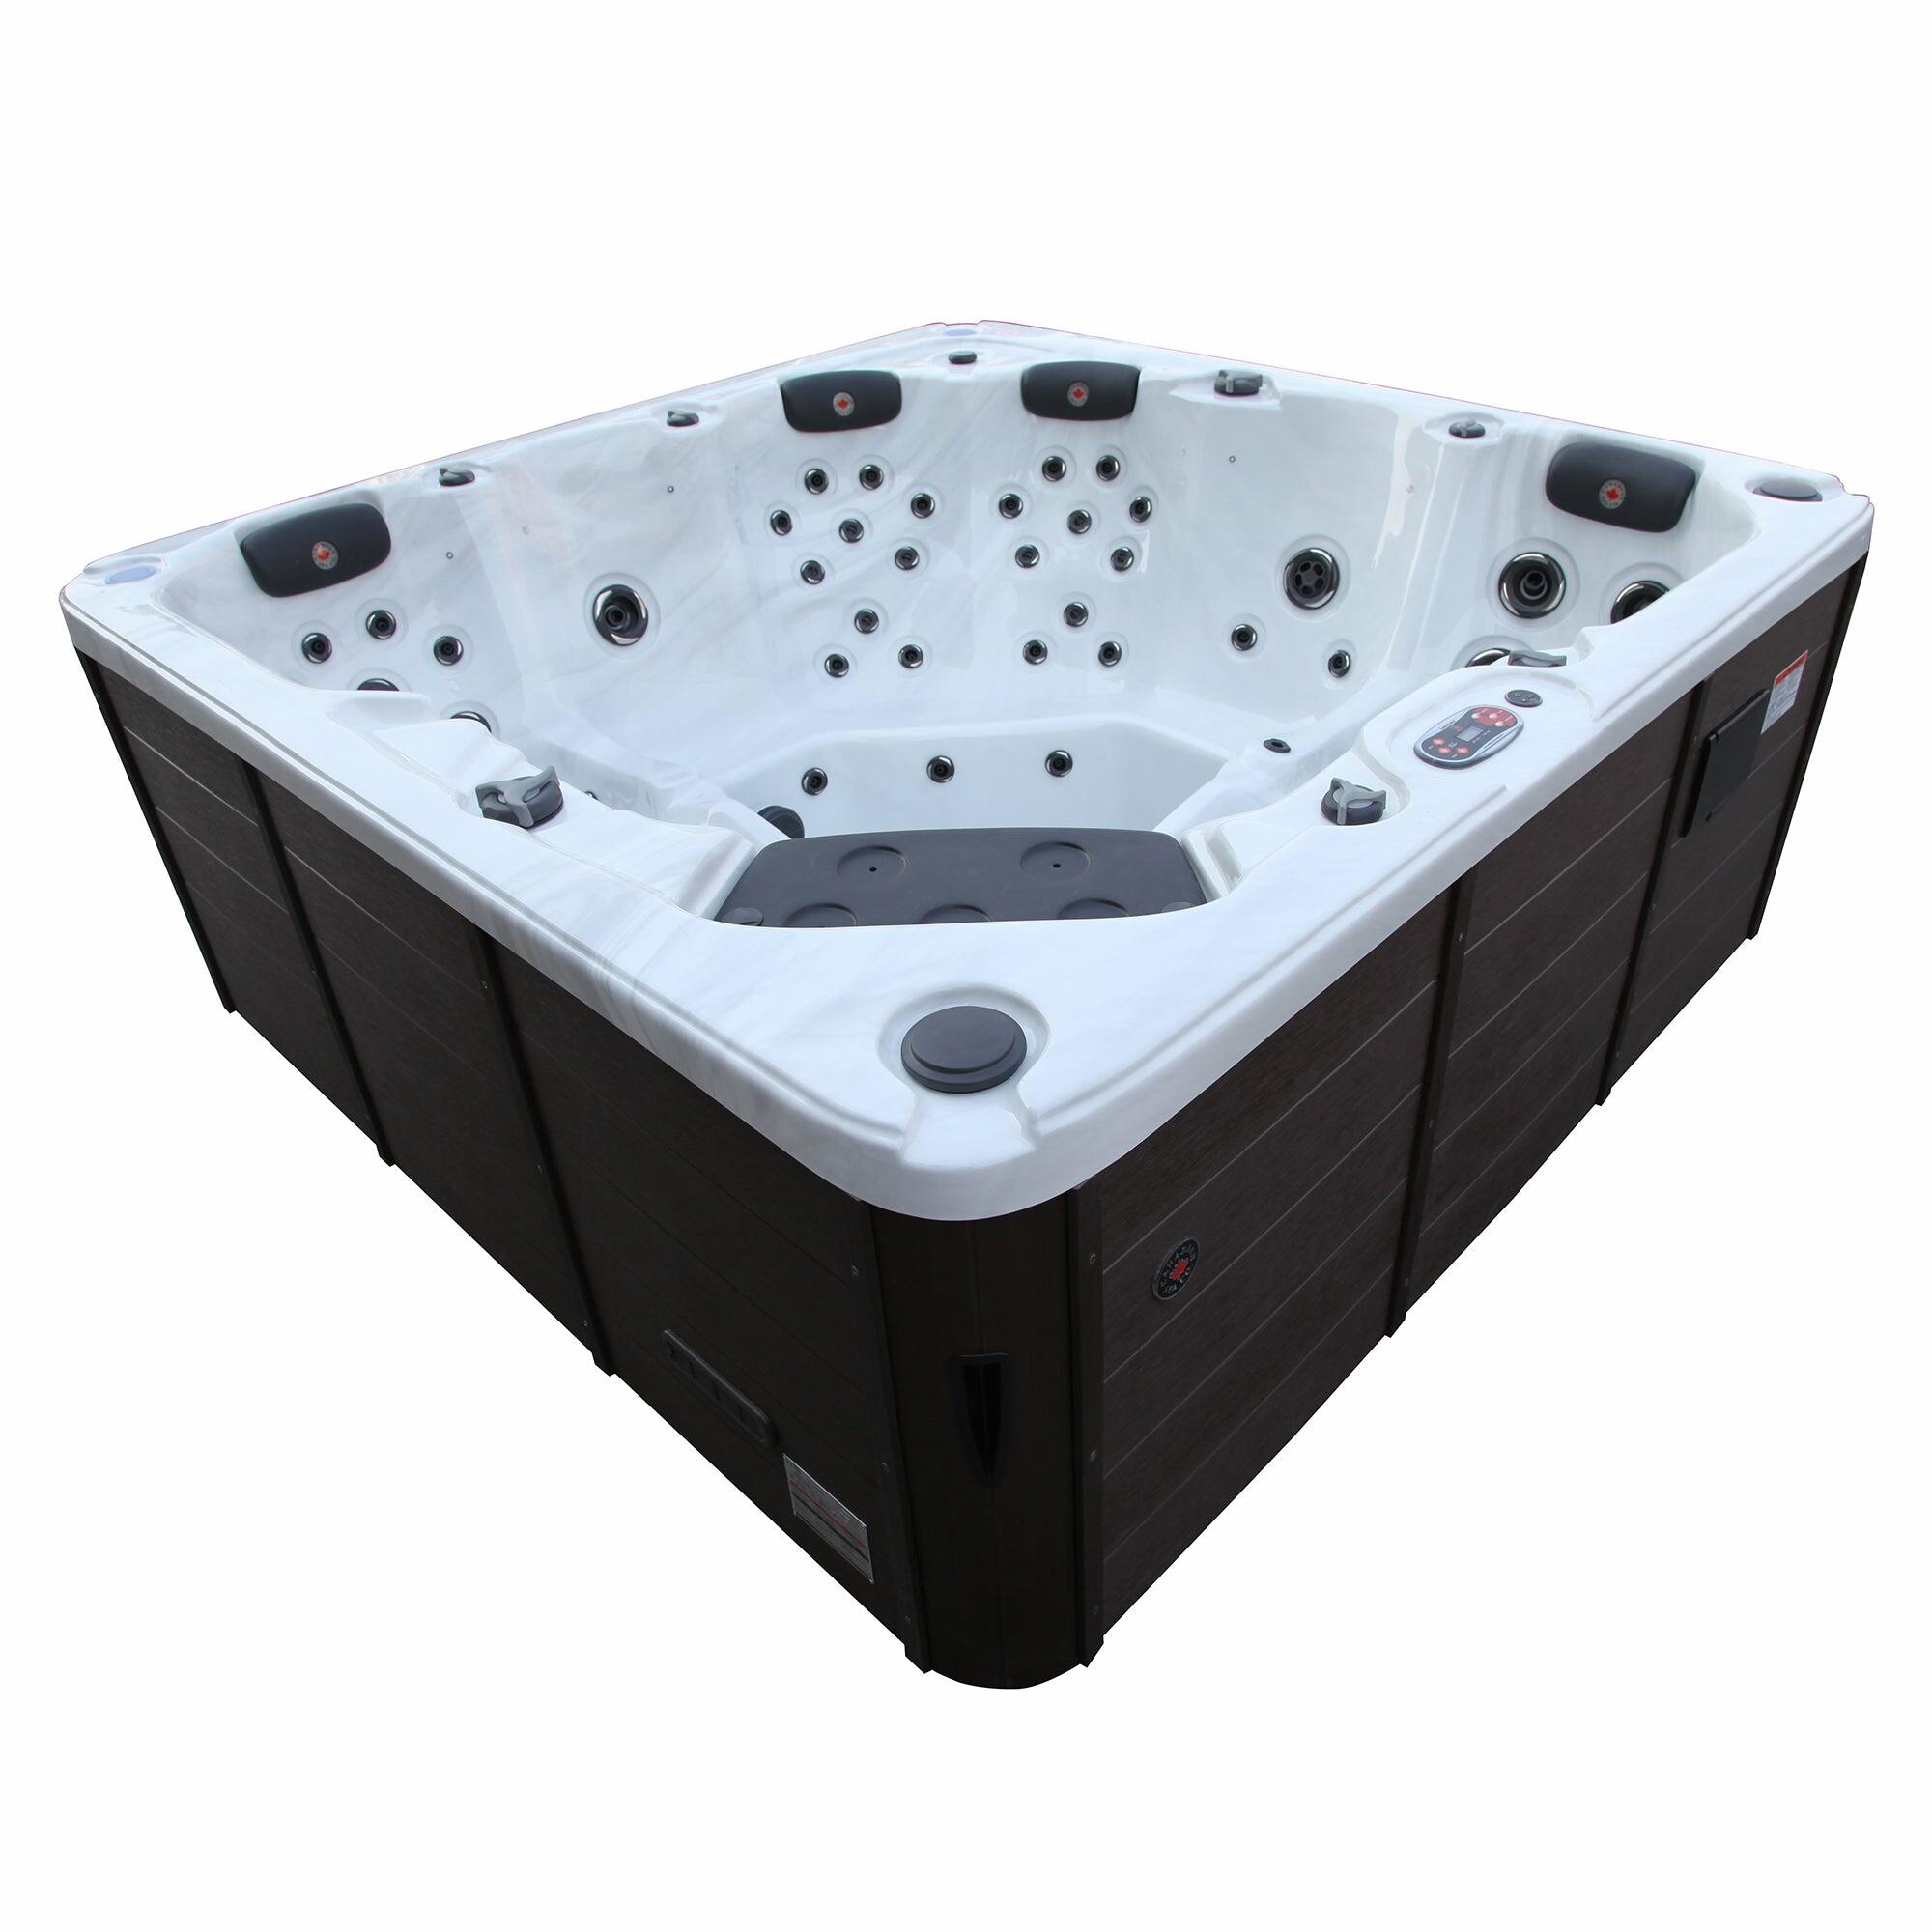 An image of Canadian Spa Vancouver 65 Jet 6 Person Hot Tub